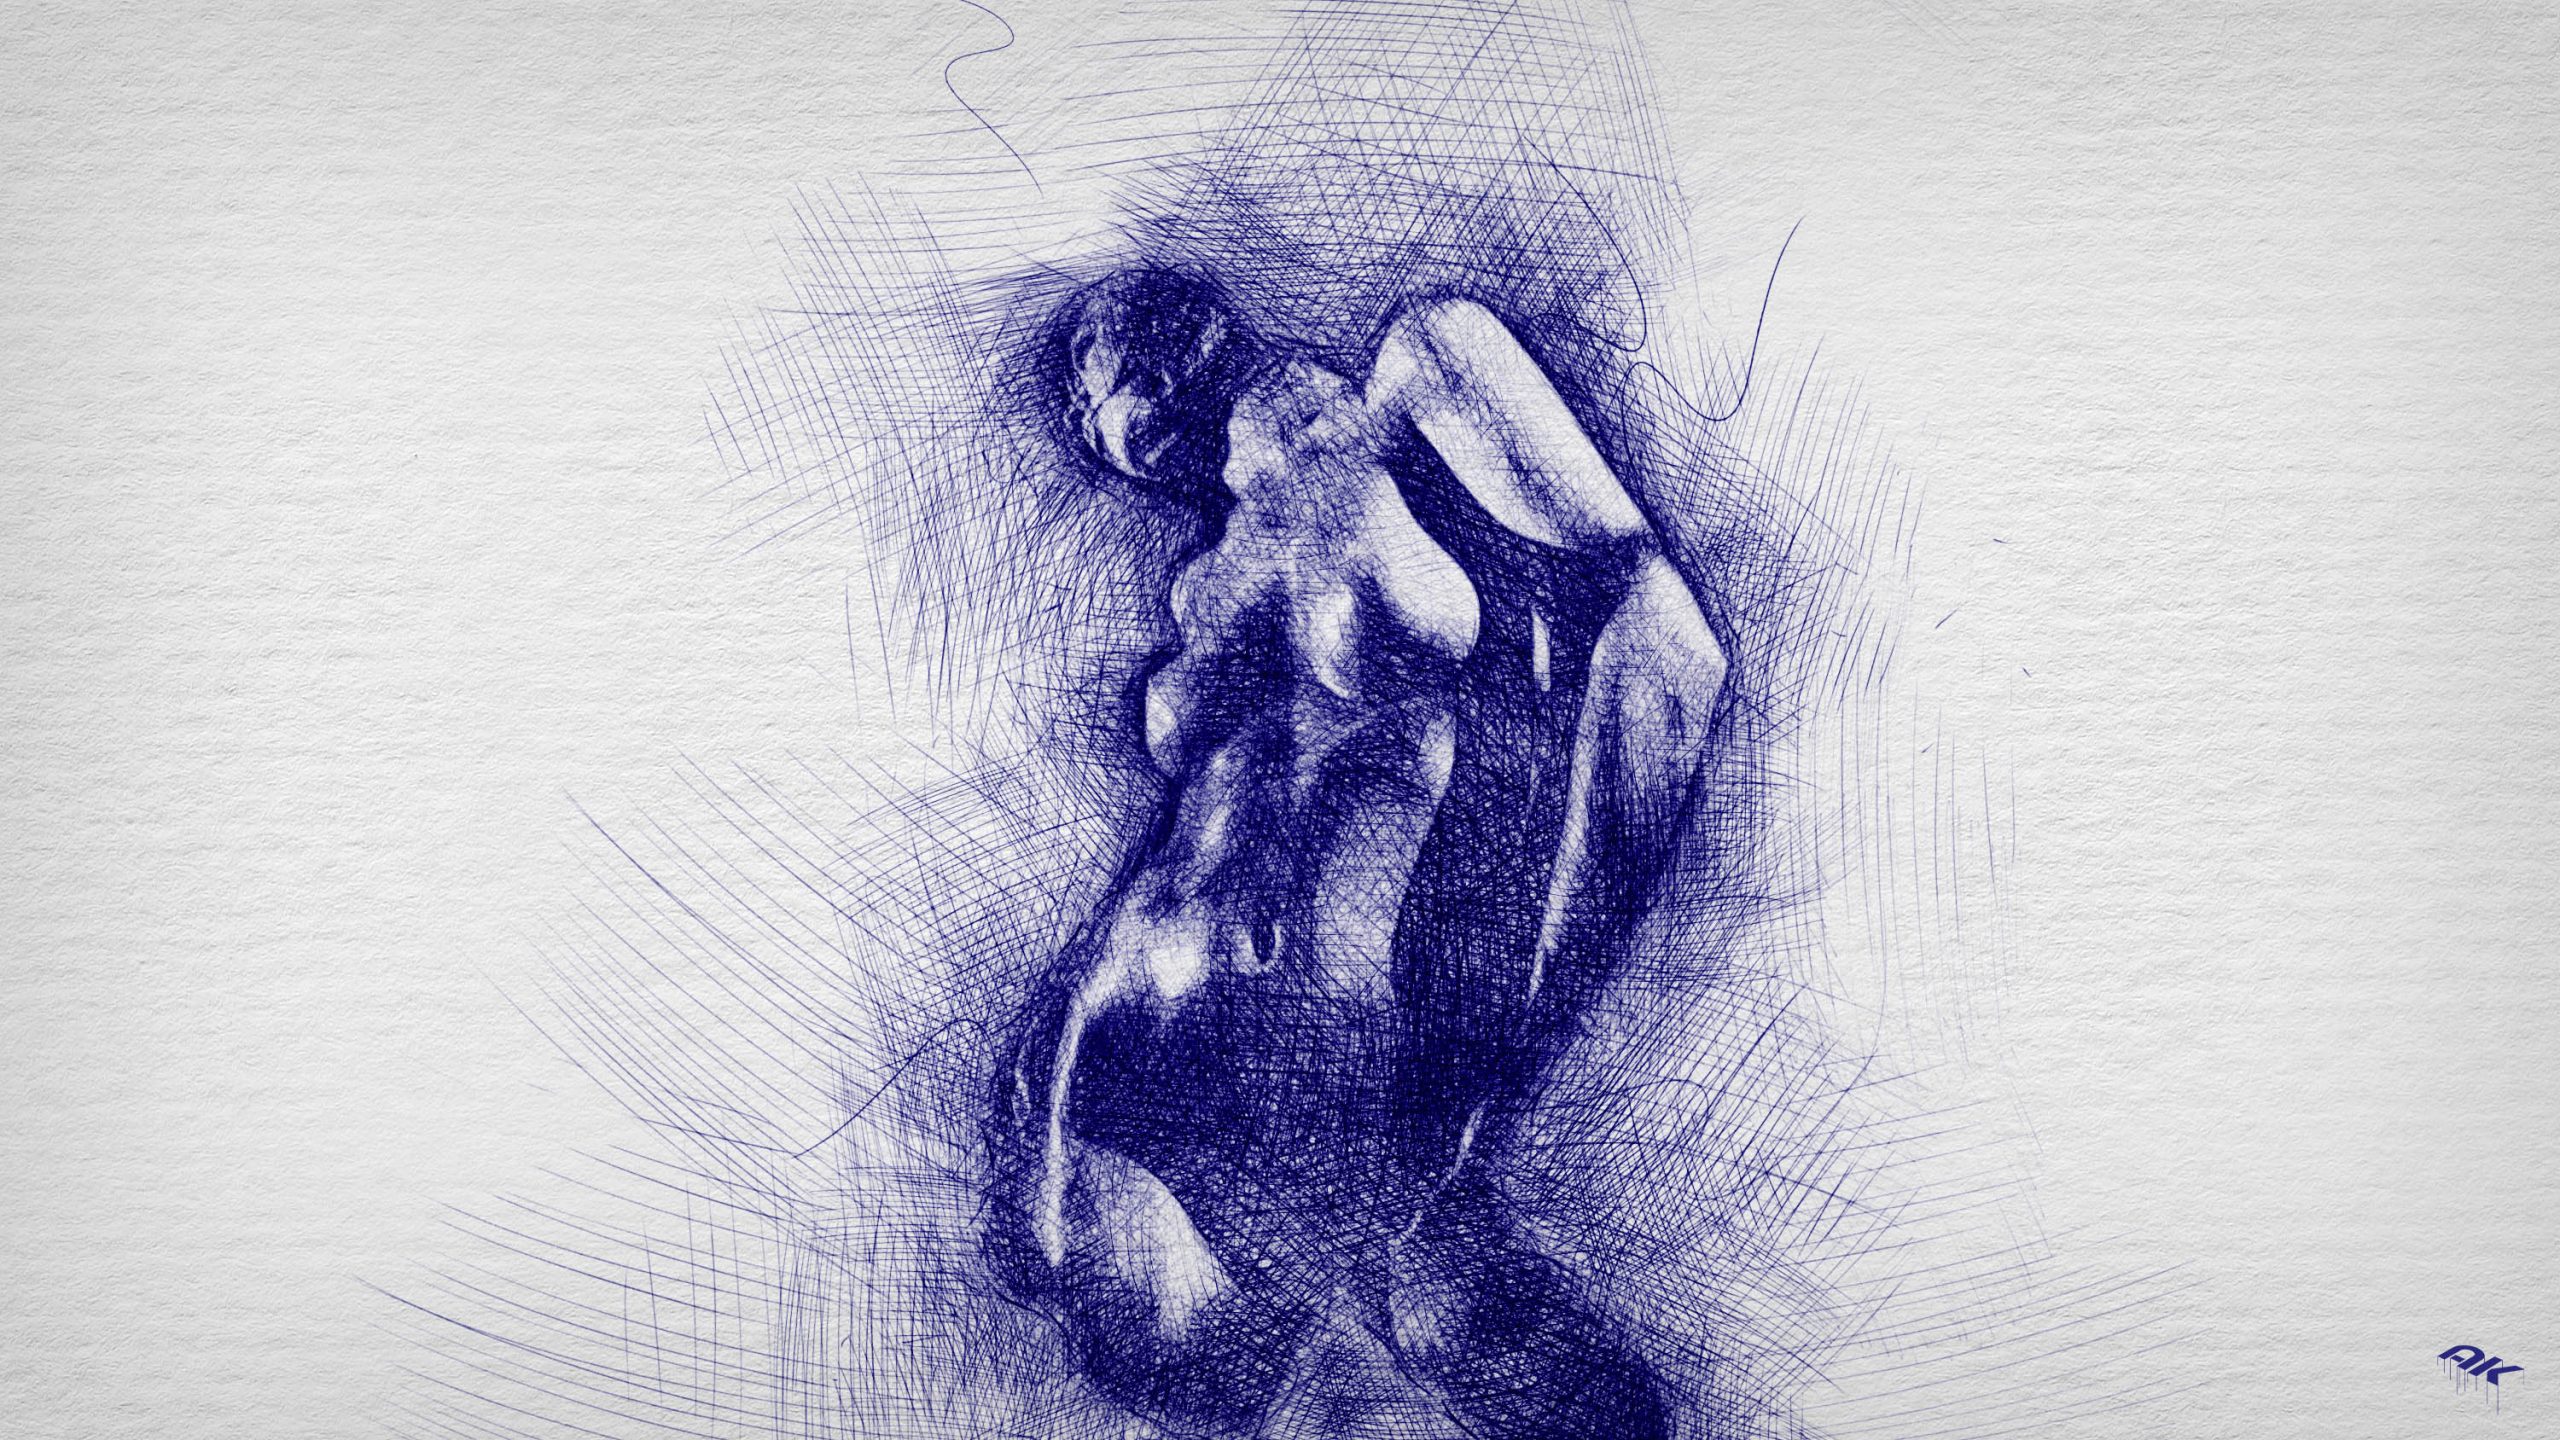 life-drawing-series-5-image-8-copyright-andrew-knutt